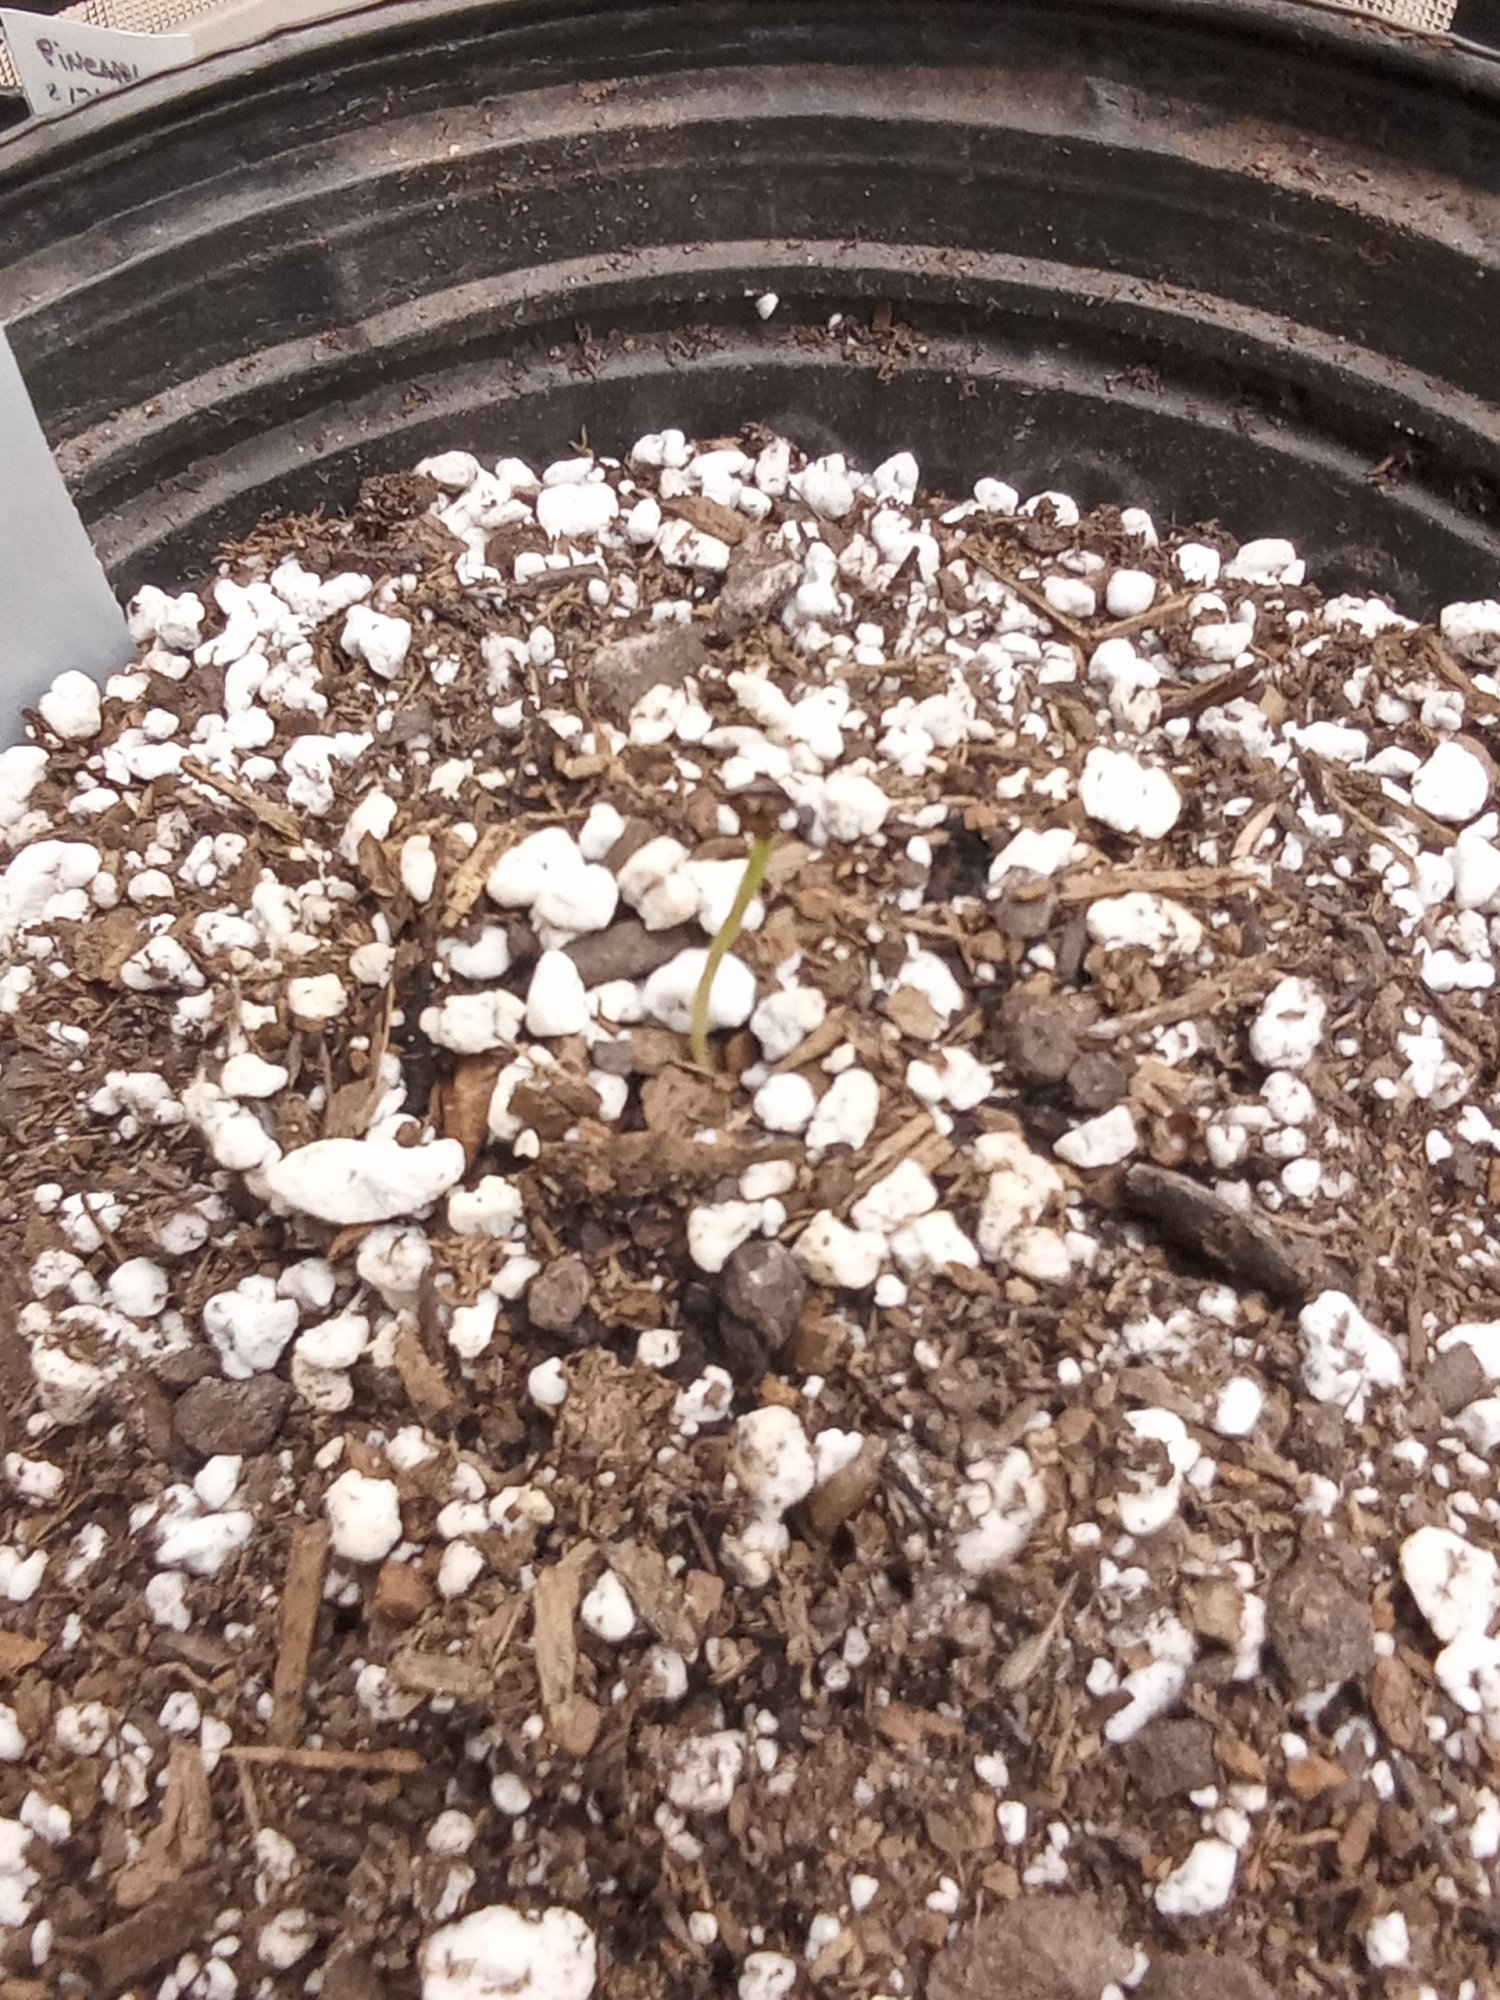 Whats wrong with this seedling 2